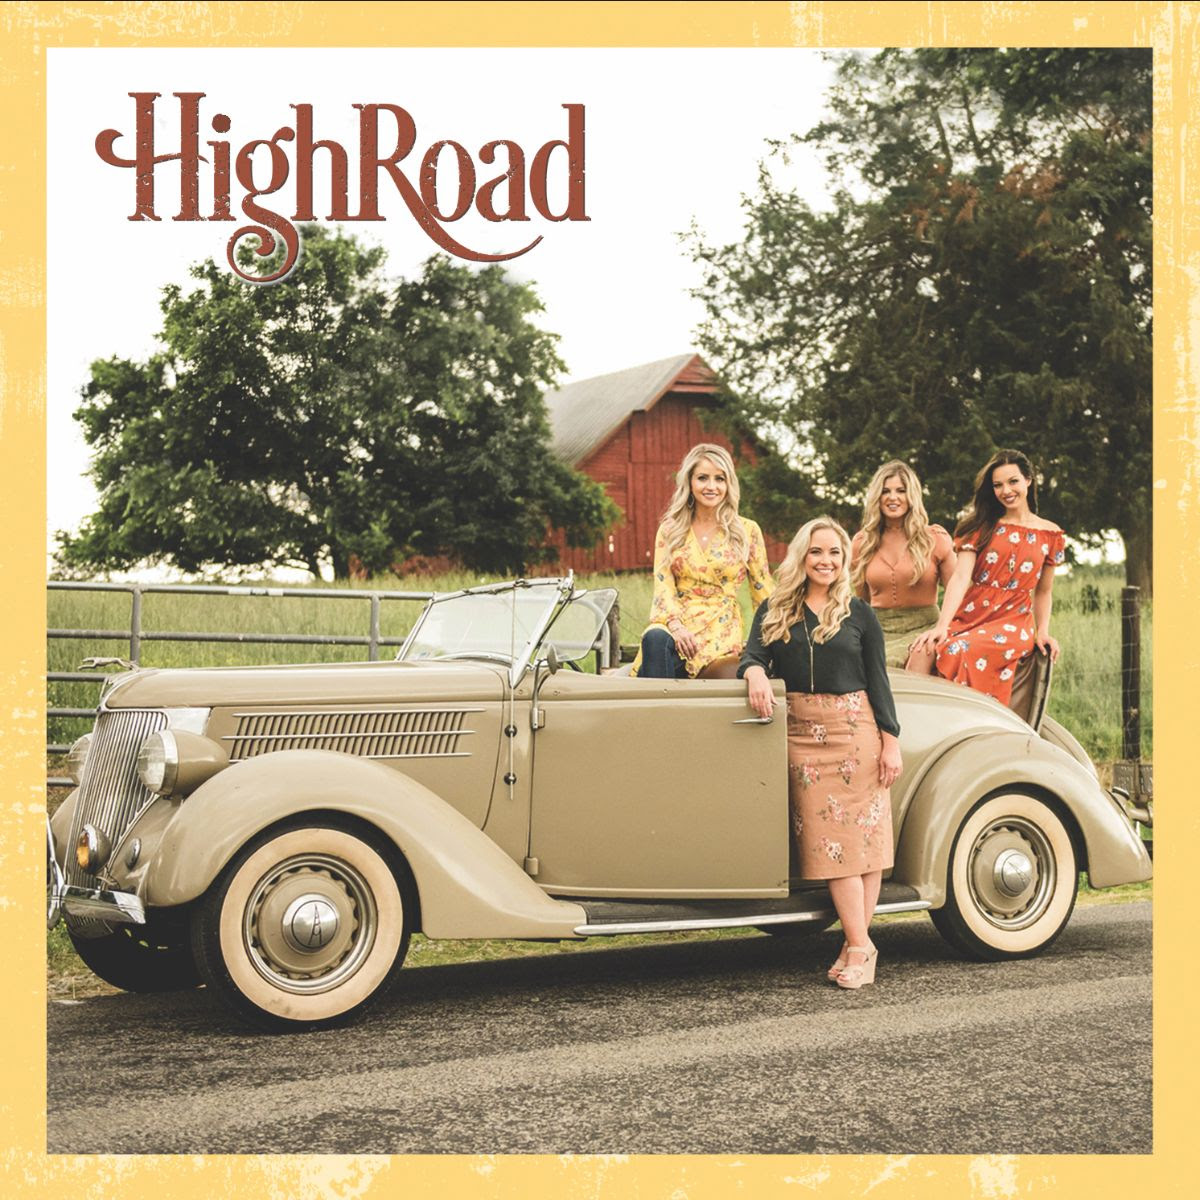 HighRoad Releases Highly-Anticipated Debut Album on New Day Records